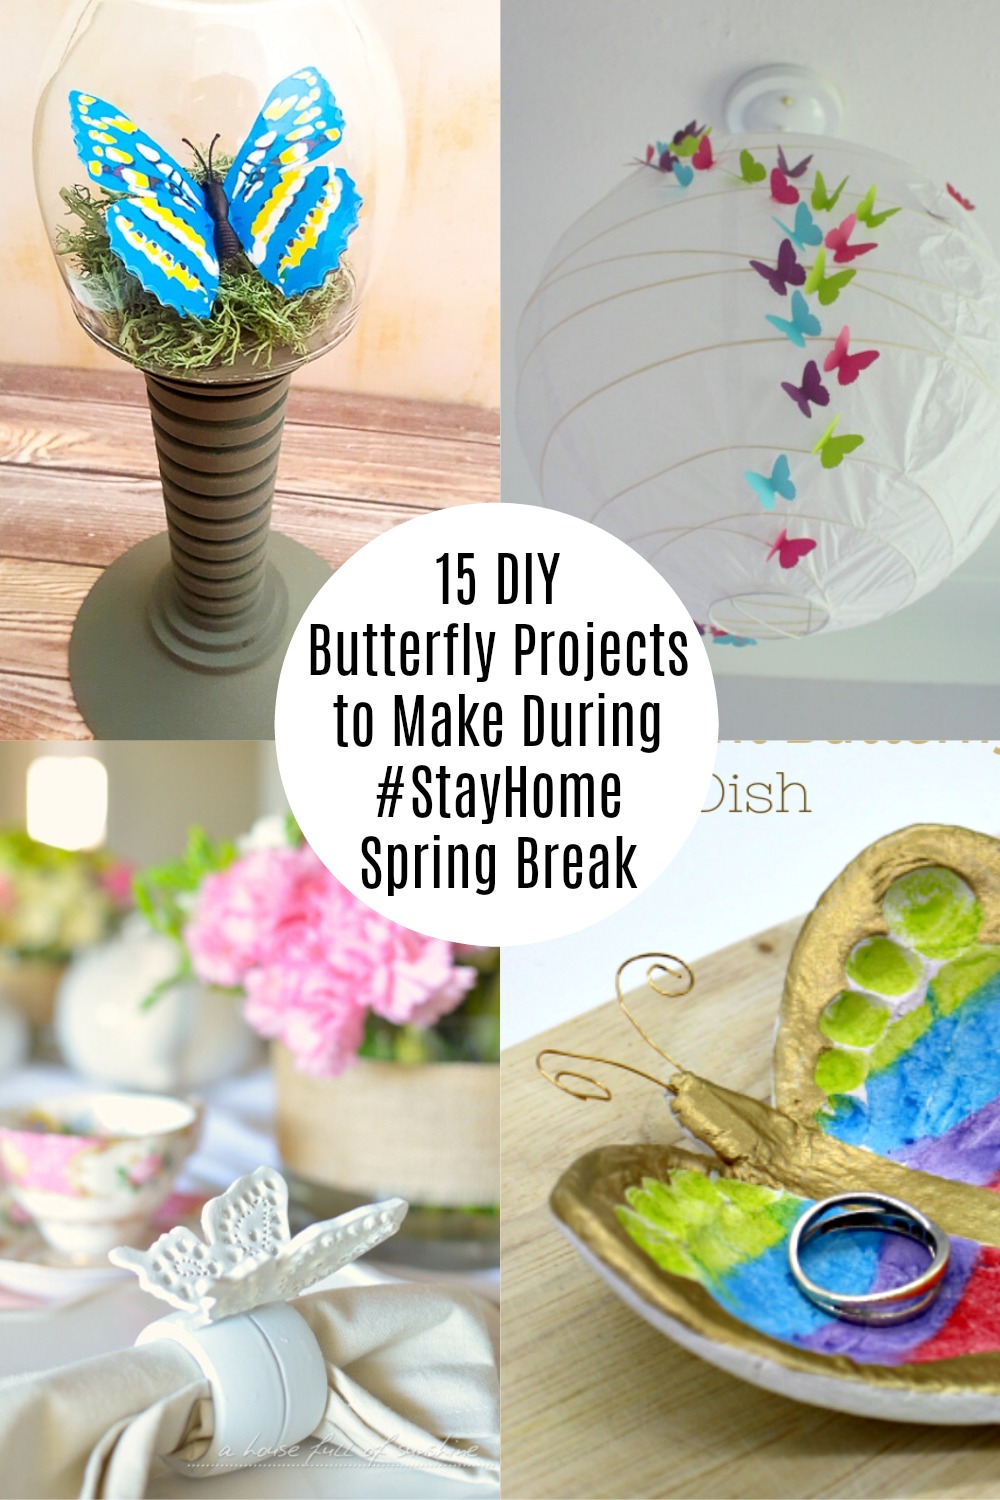 15 DIY Butterfly Projects to Make During Spring Break